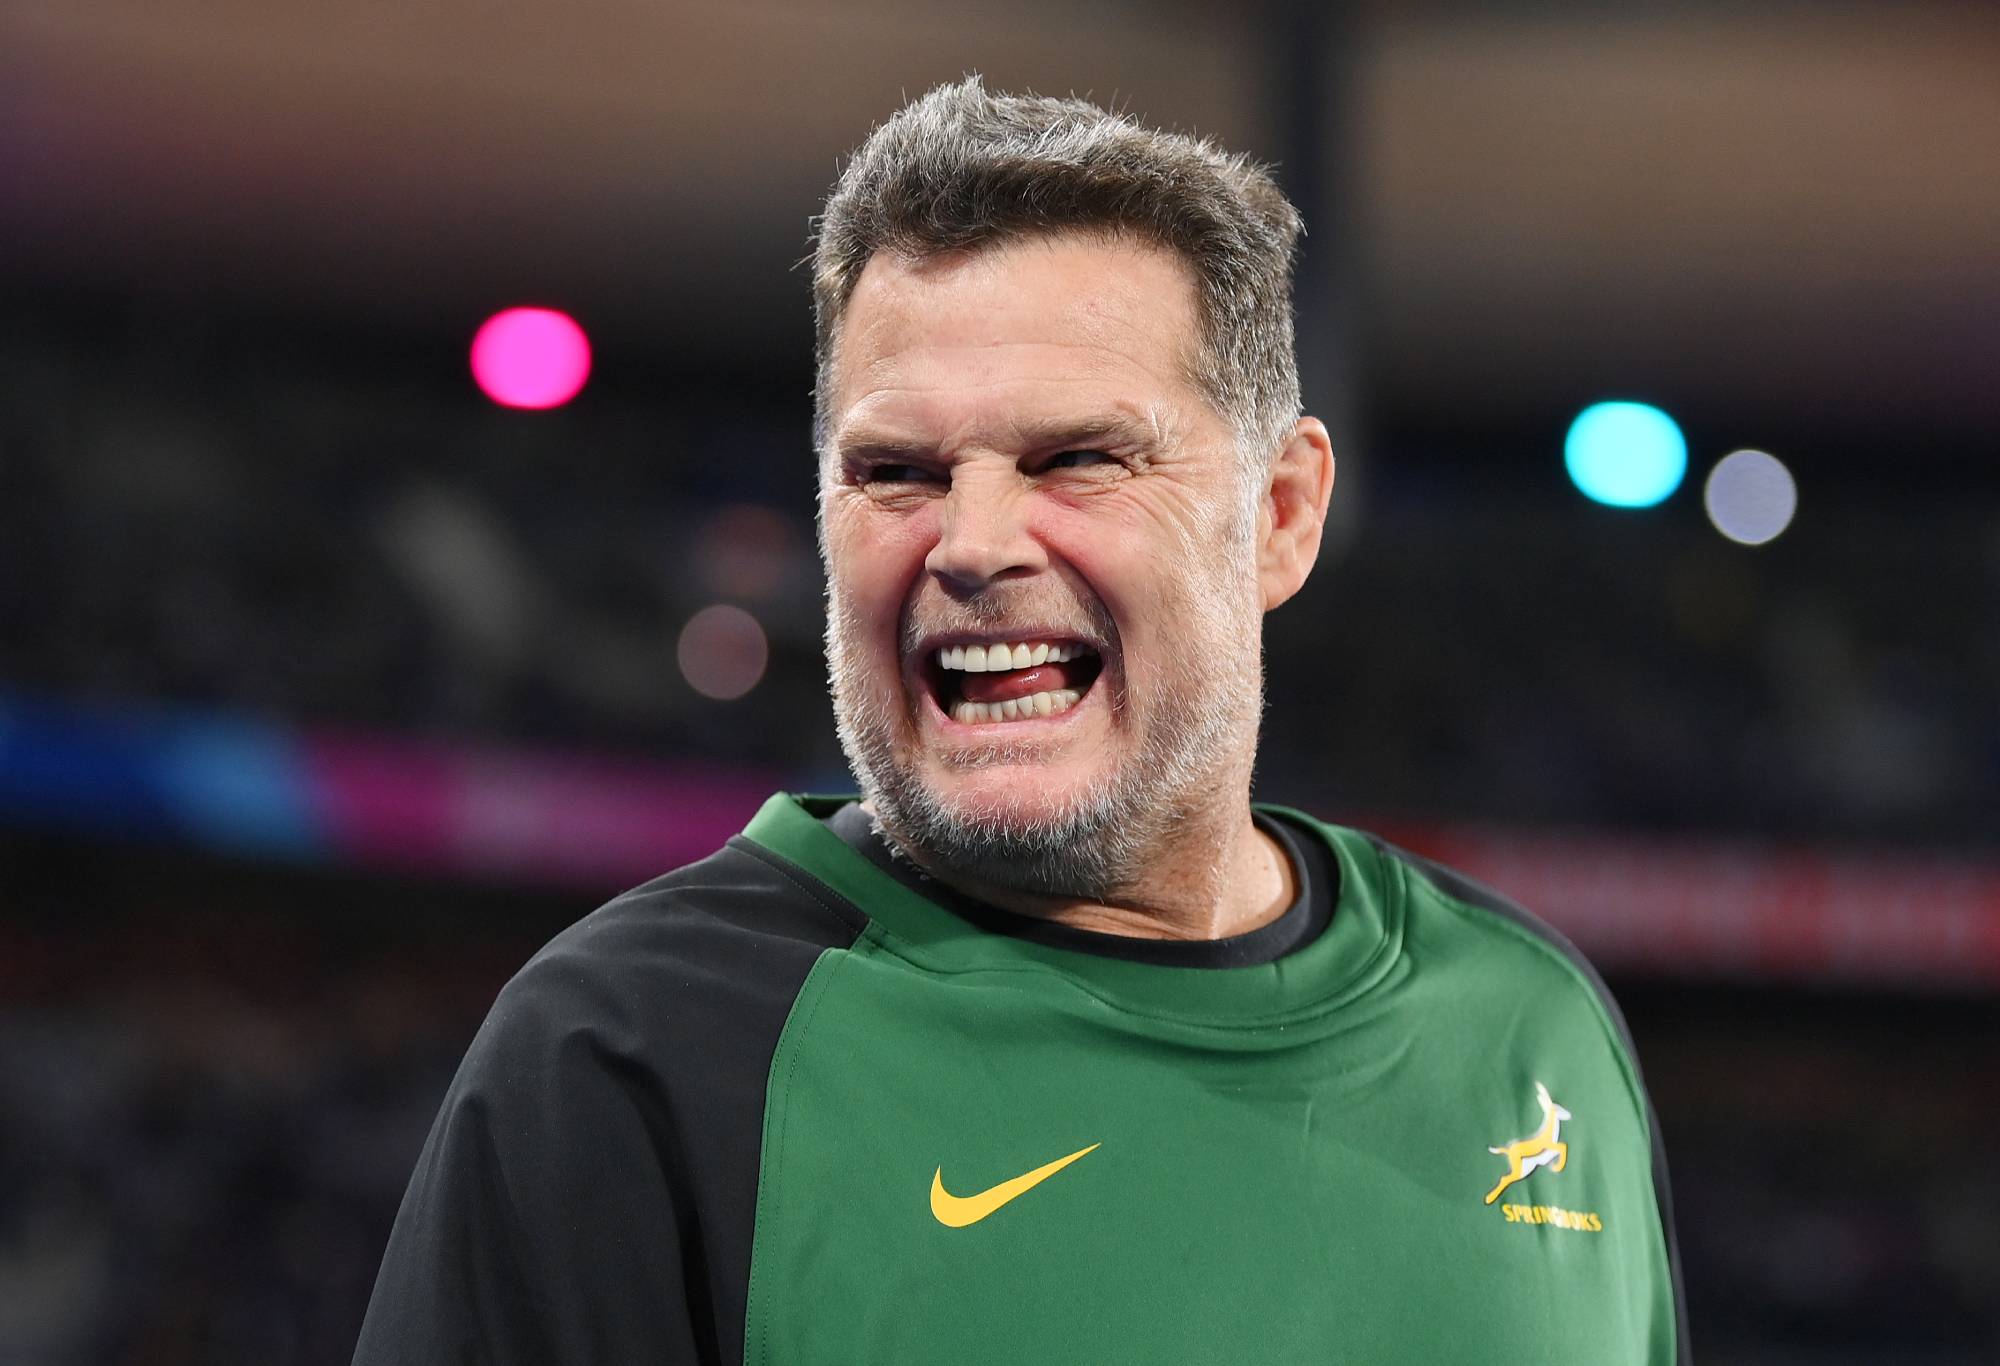 Rassie Erasmus, Coach of South Africa, looks on prior to the Rugby World Cup France 2023 Quarter Final match between France and South Africa at Stade de France on October 15, 2023 in Paris, France. (Photo by Justin Setterfield - World Rugby/World Rugby via Getty Images)